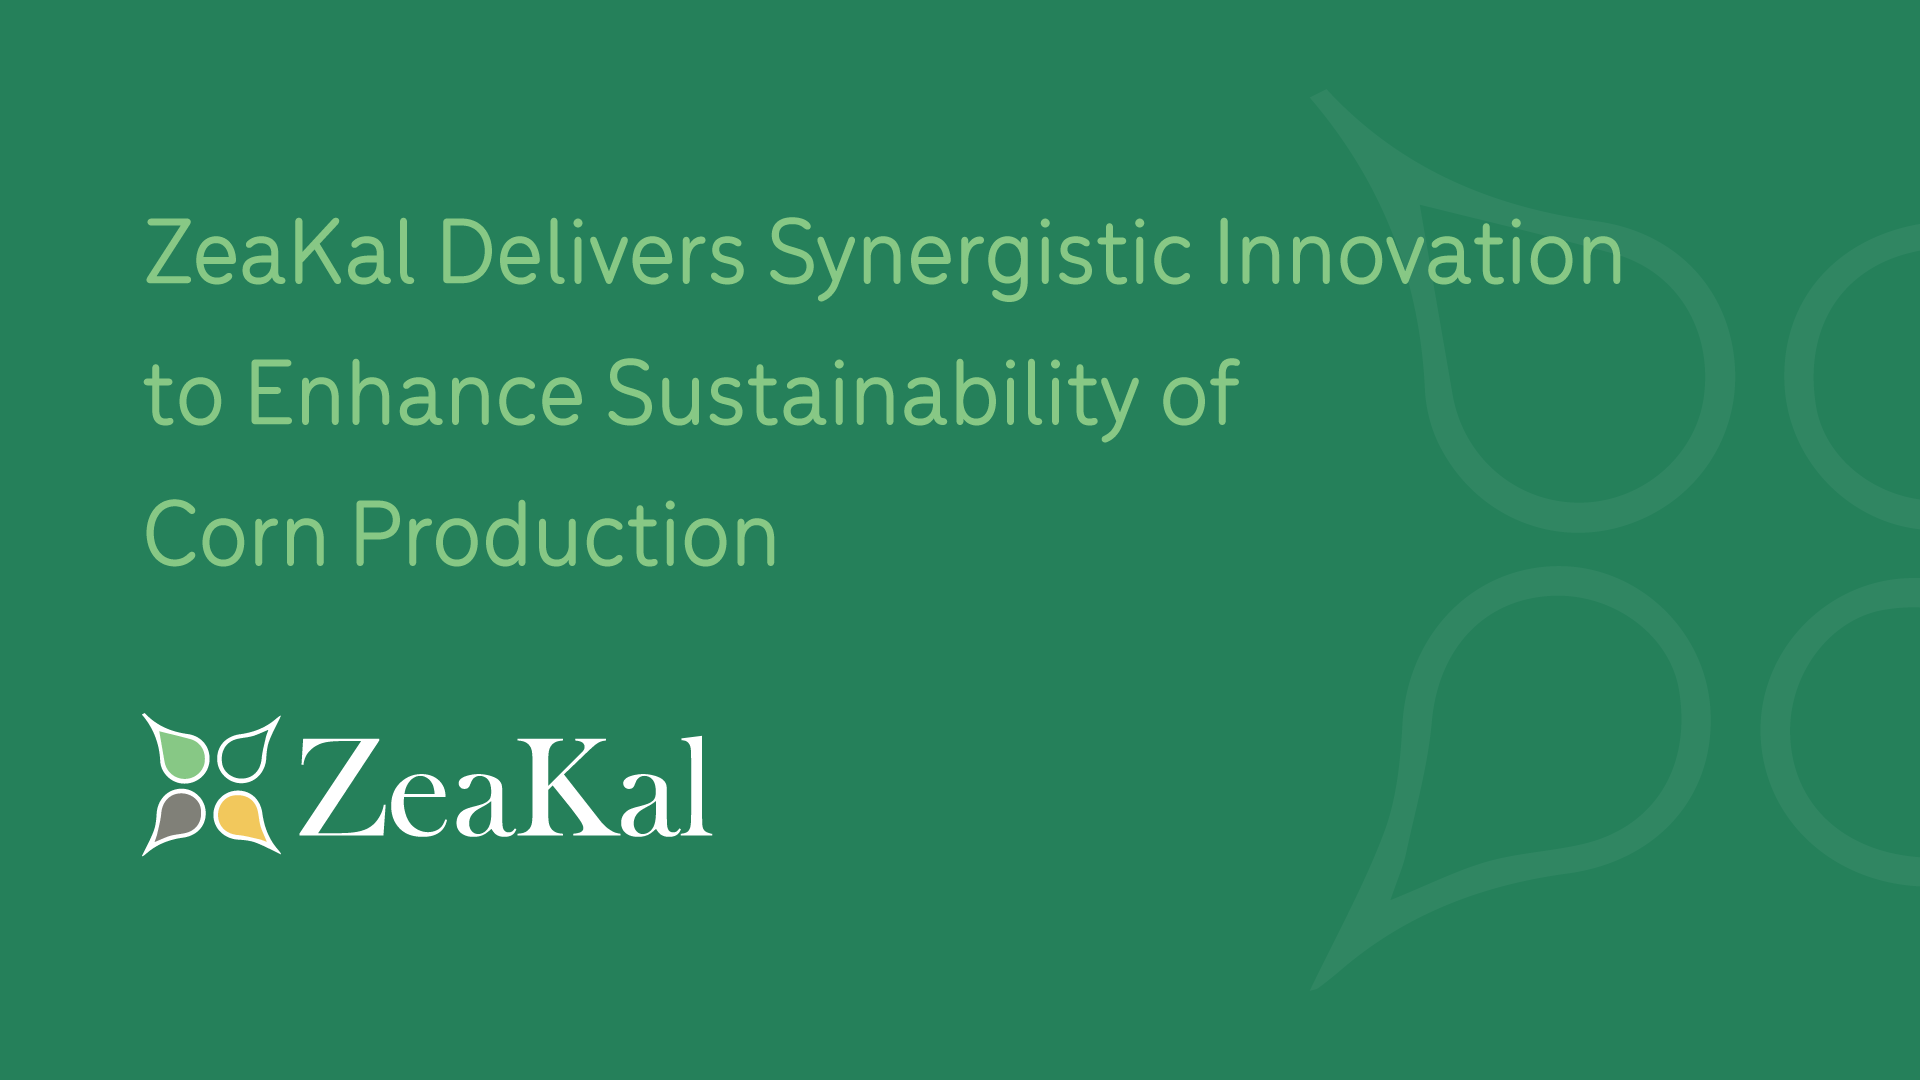 Zeakal Delivers Synergistic Innovation To Enhance Sustainability Of Corn Production